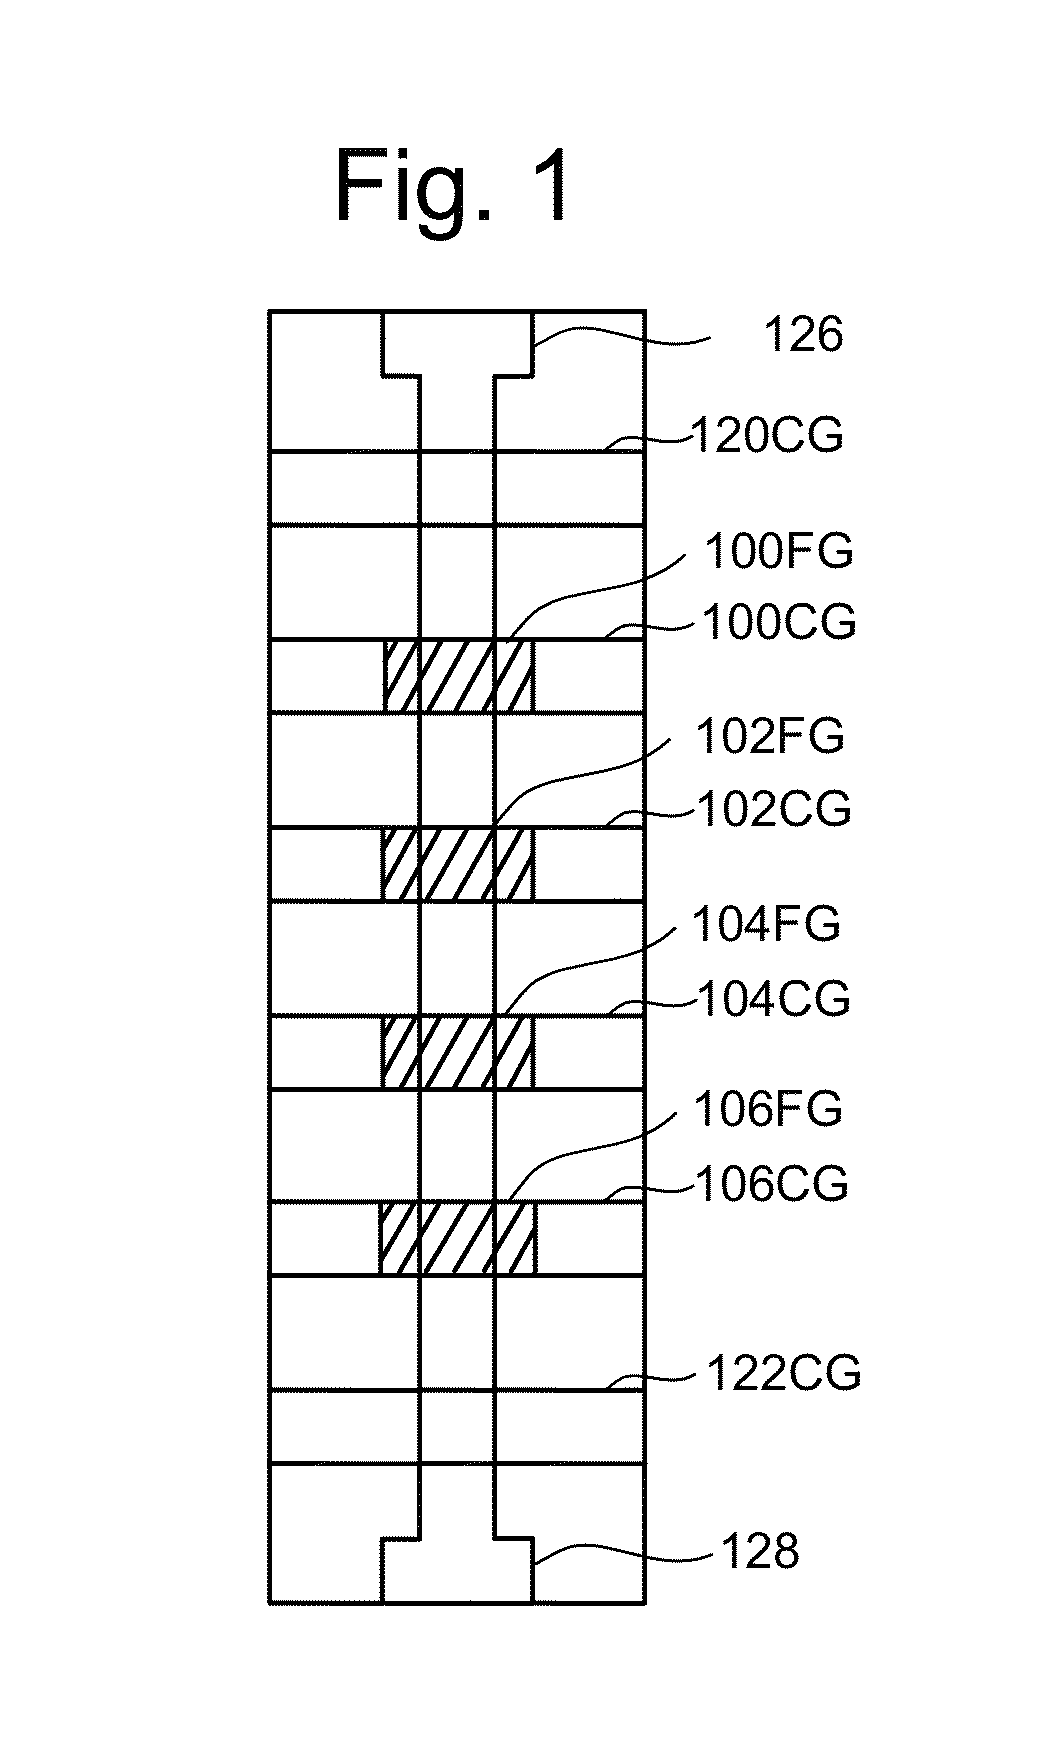 Single-level cell endurance improvement with pre-defined blocks